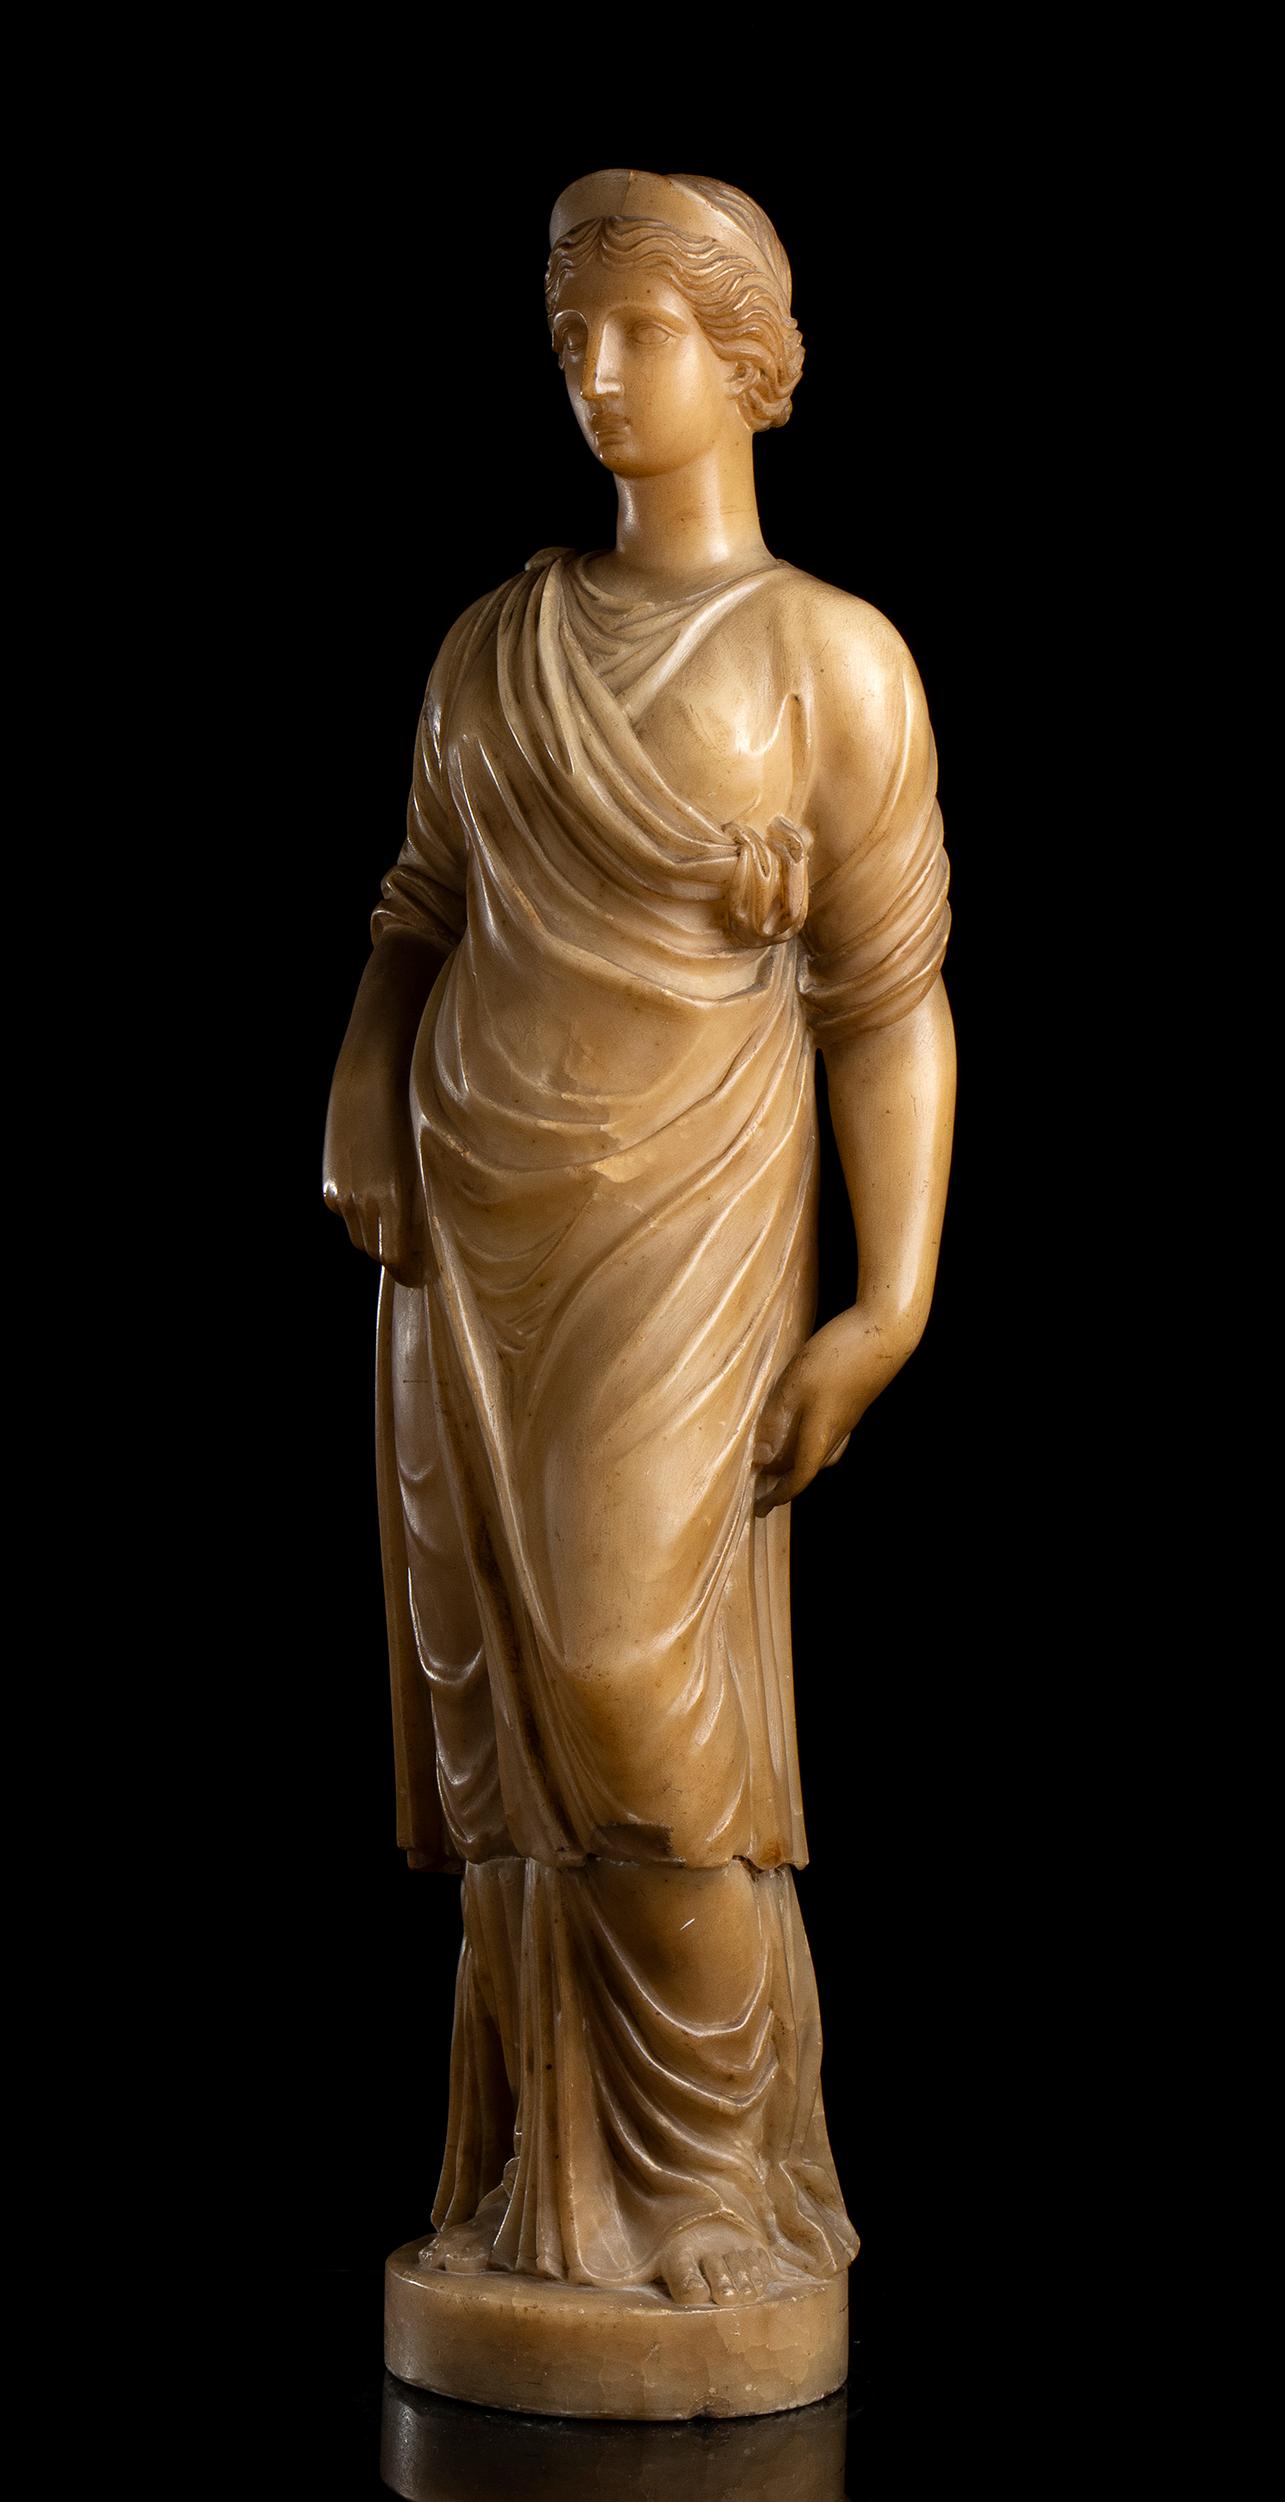 Exceptional Roman alabaster statue, Italian provenance, early 19th century period 1800-1810 ca.
The alabaster statue depicts a vestal of the temple, wearing ancient Roman dress.
Large in size and of great workmanship, careful in its detail and